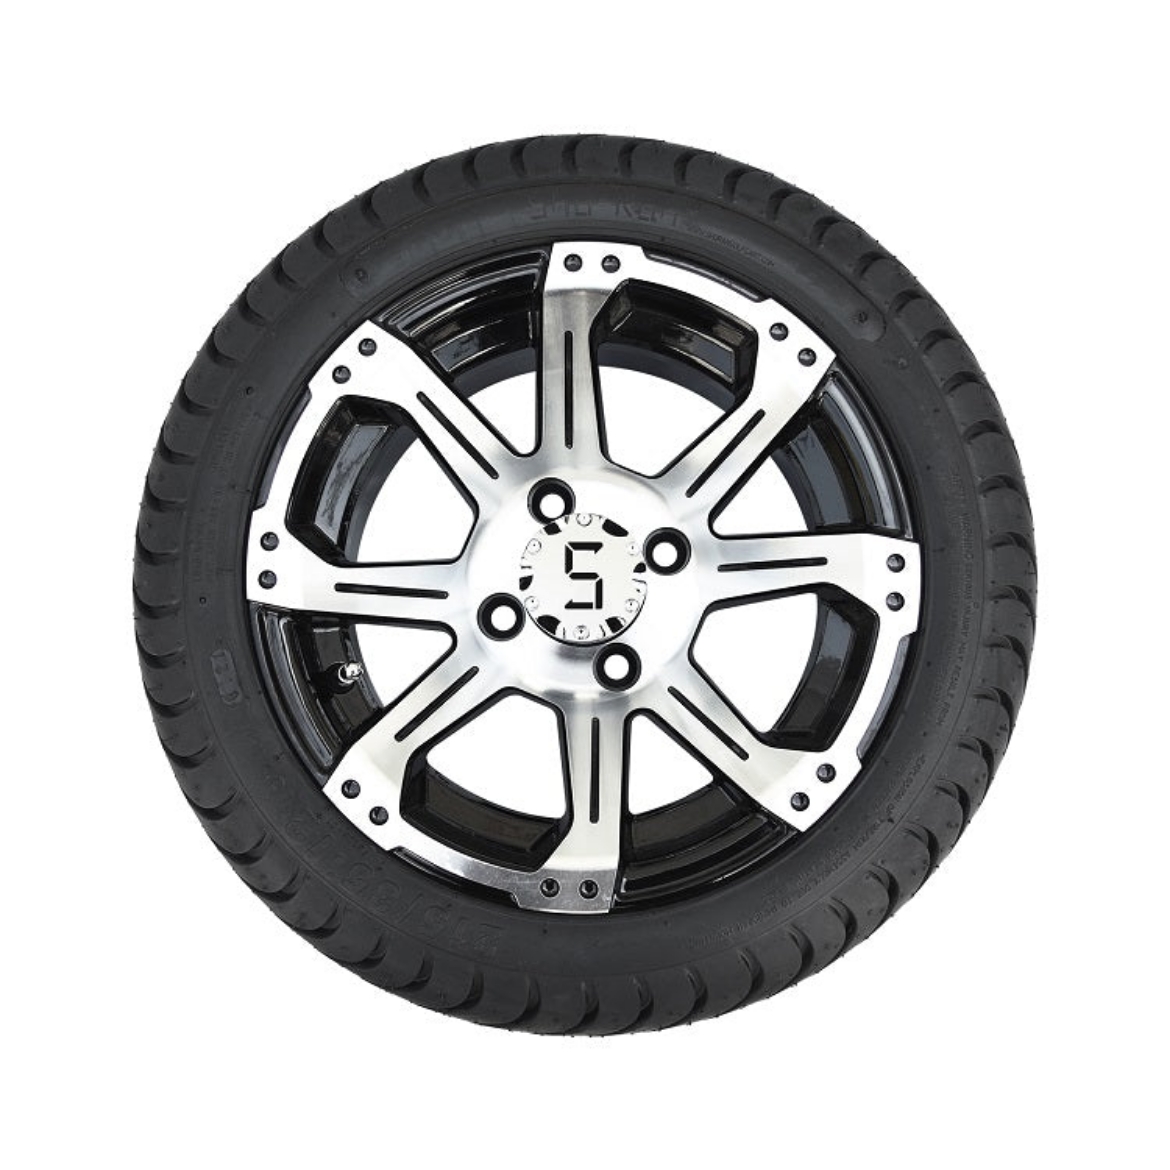 Picture of 12" WHEEL AND 215/35-12 TYRE COMBO. $690 PER SET